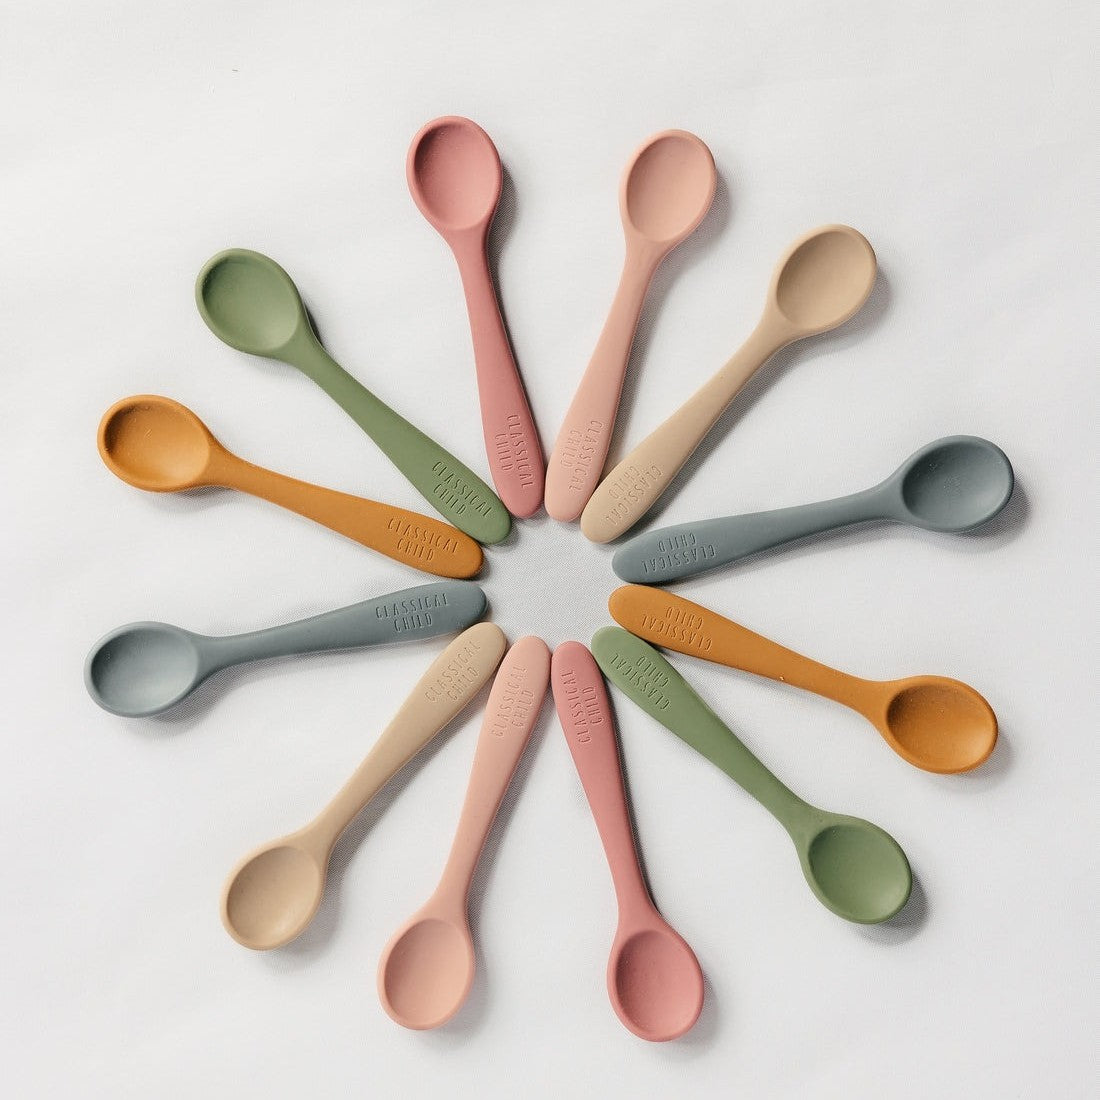 Classical Child Silicone Spoon - Sage 2 Pack